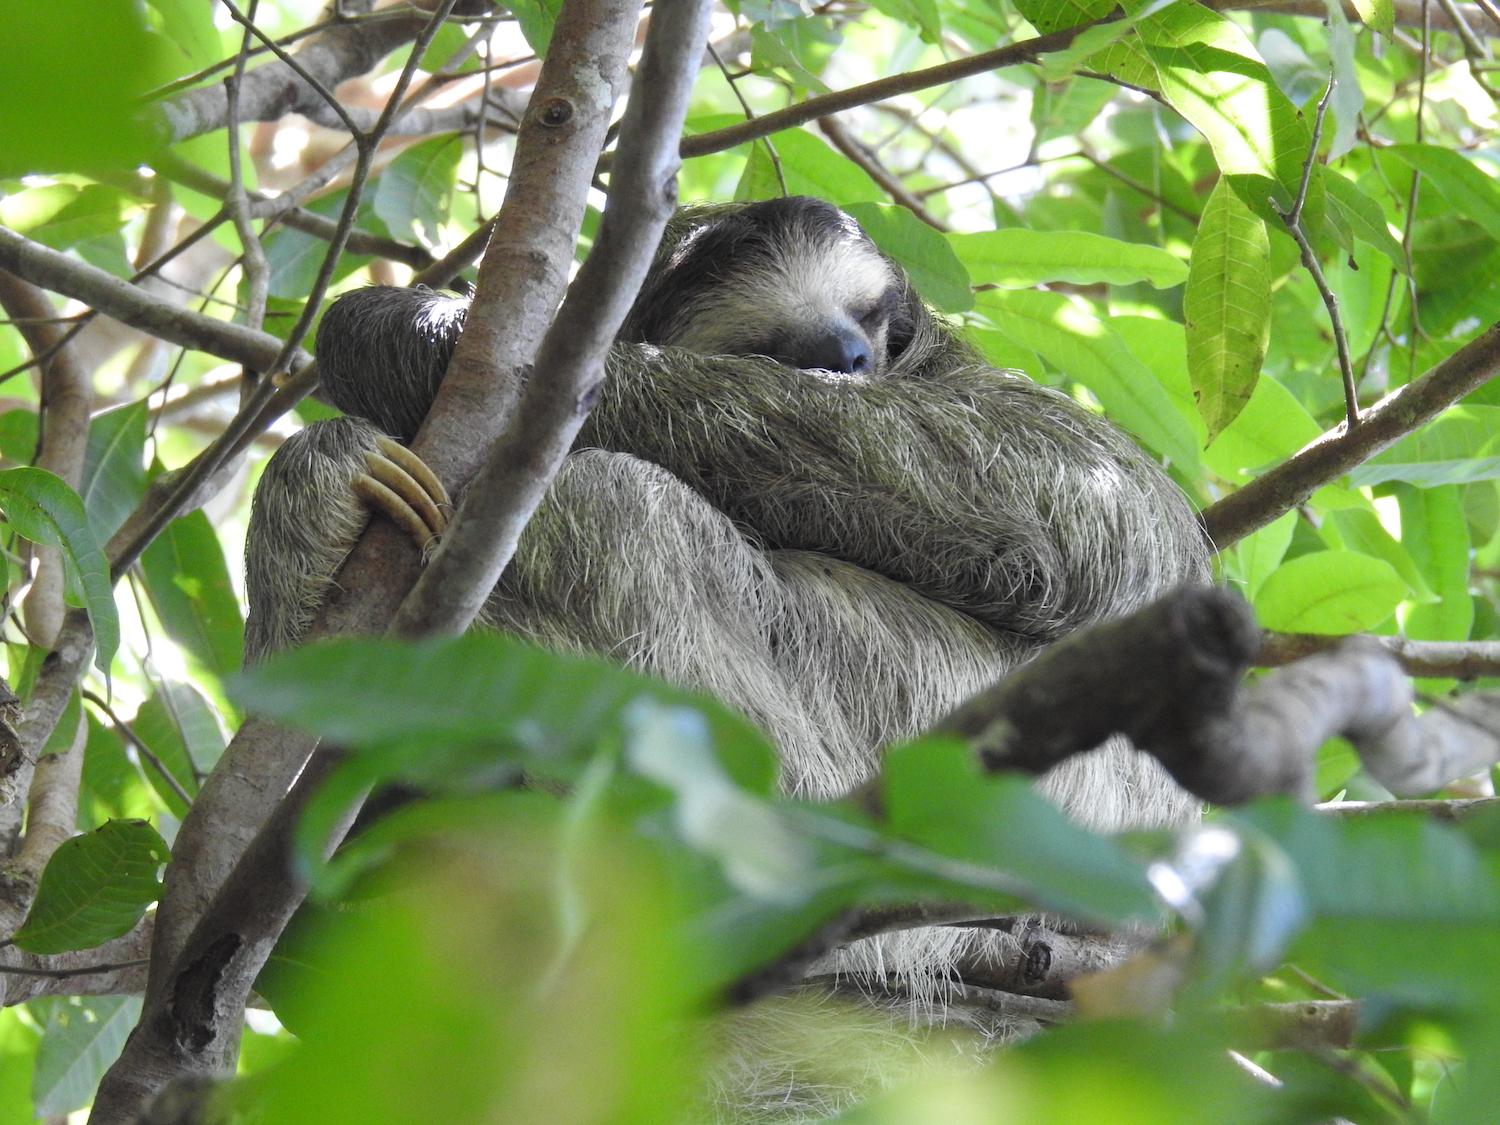 This sleepy three-toed sloth is showing off its limbs and curved claws.